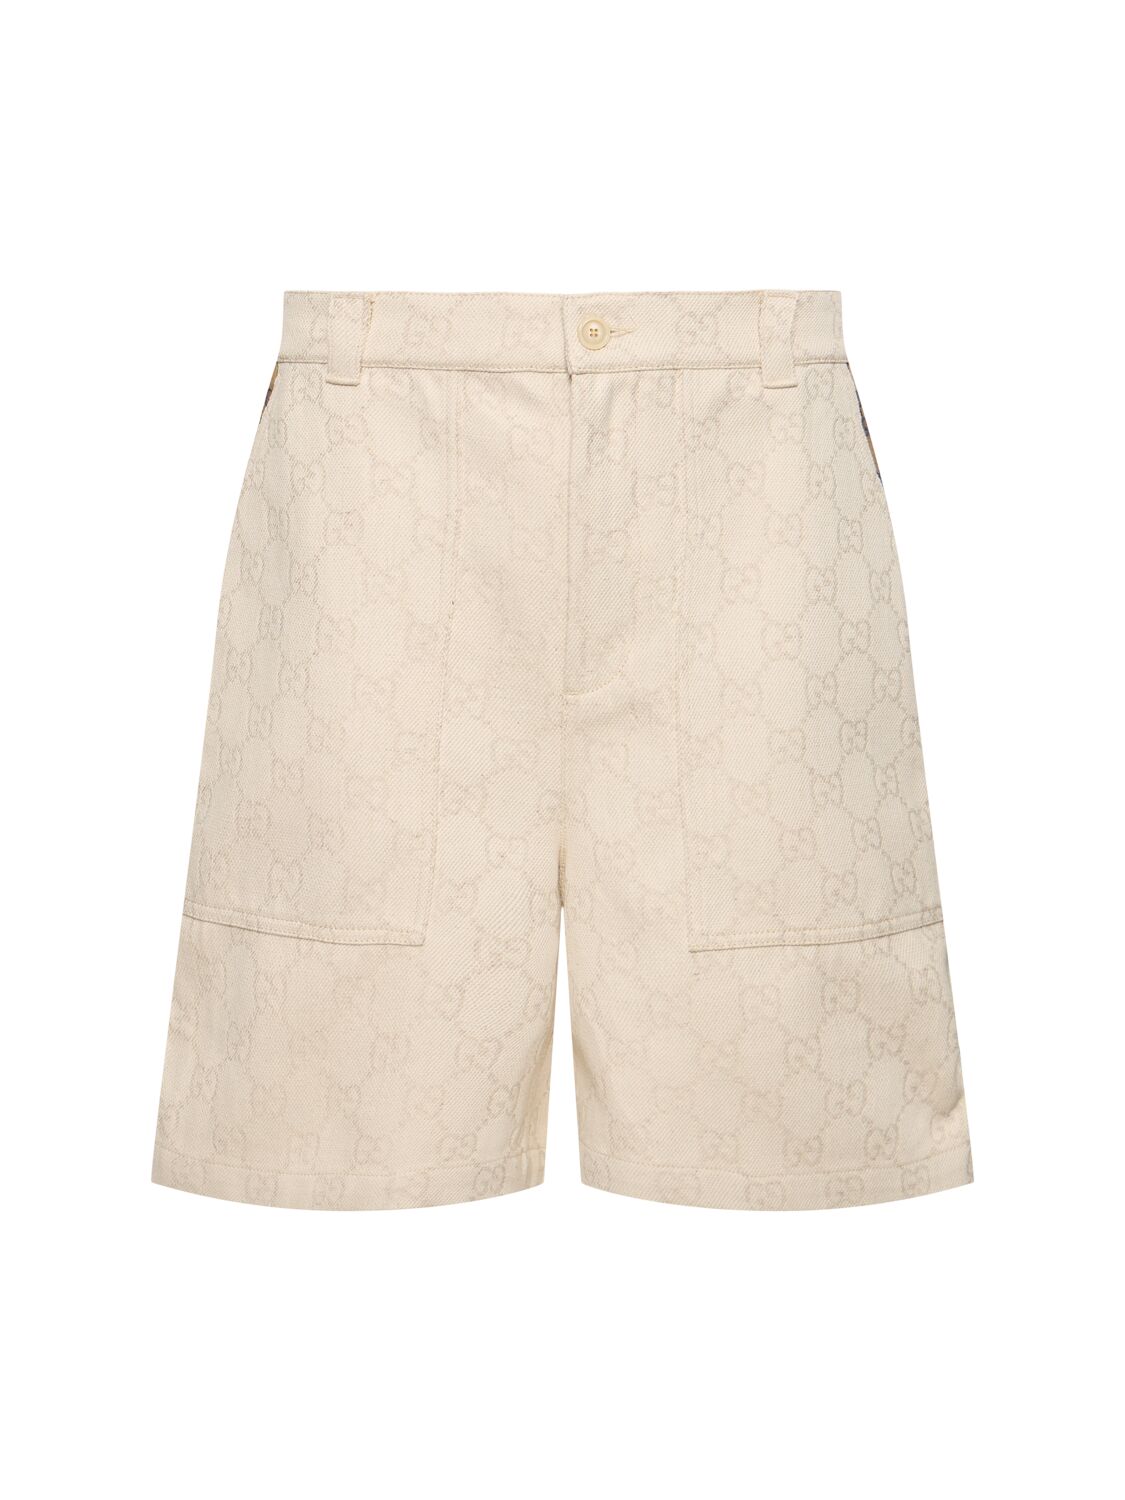 Image of Gg Web Details Canvas Shorts